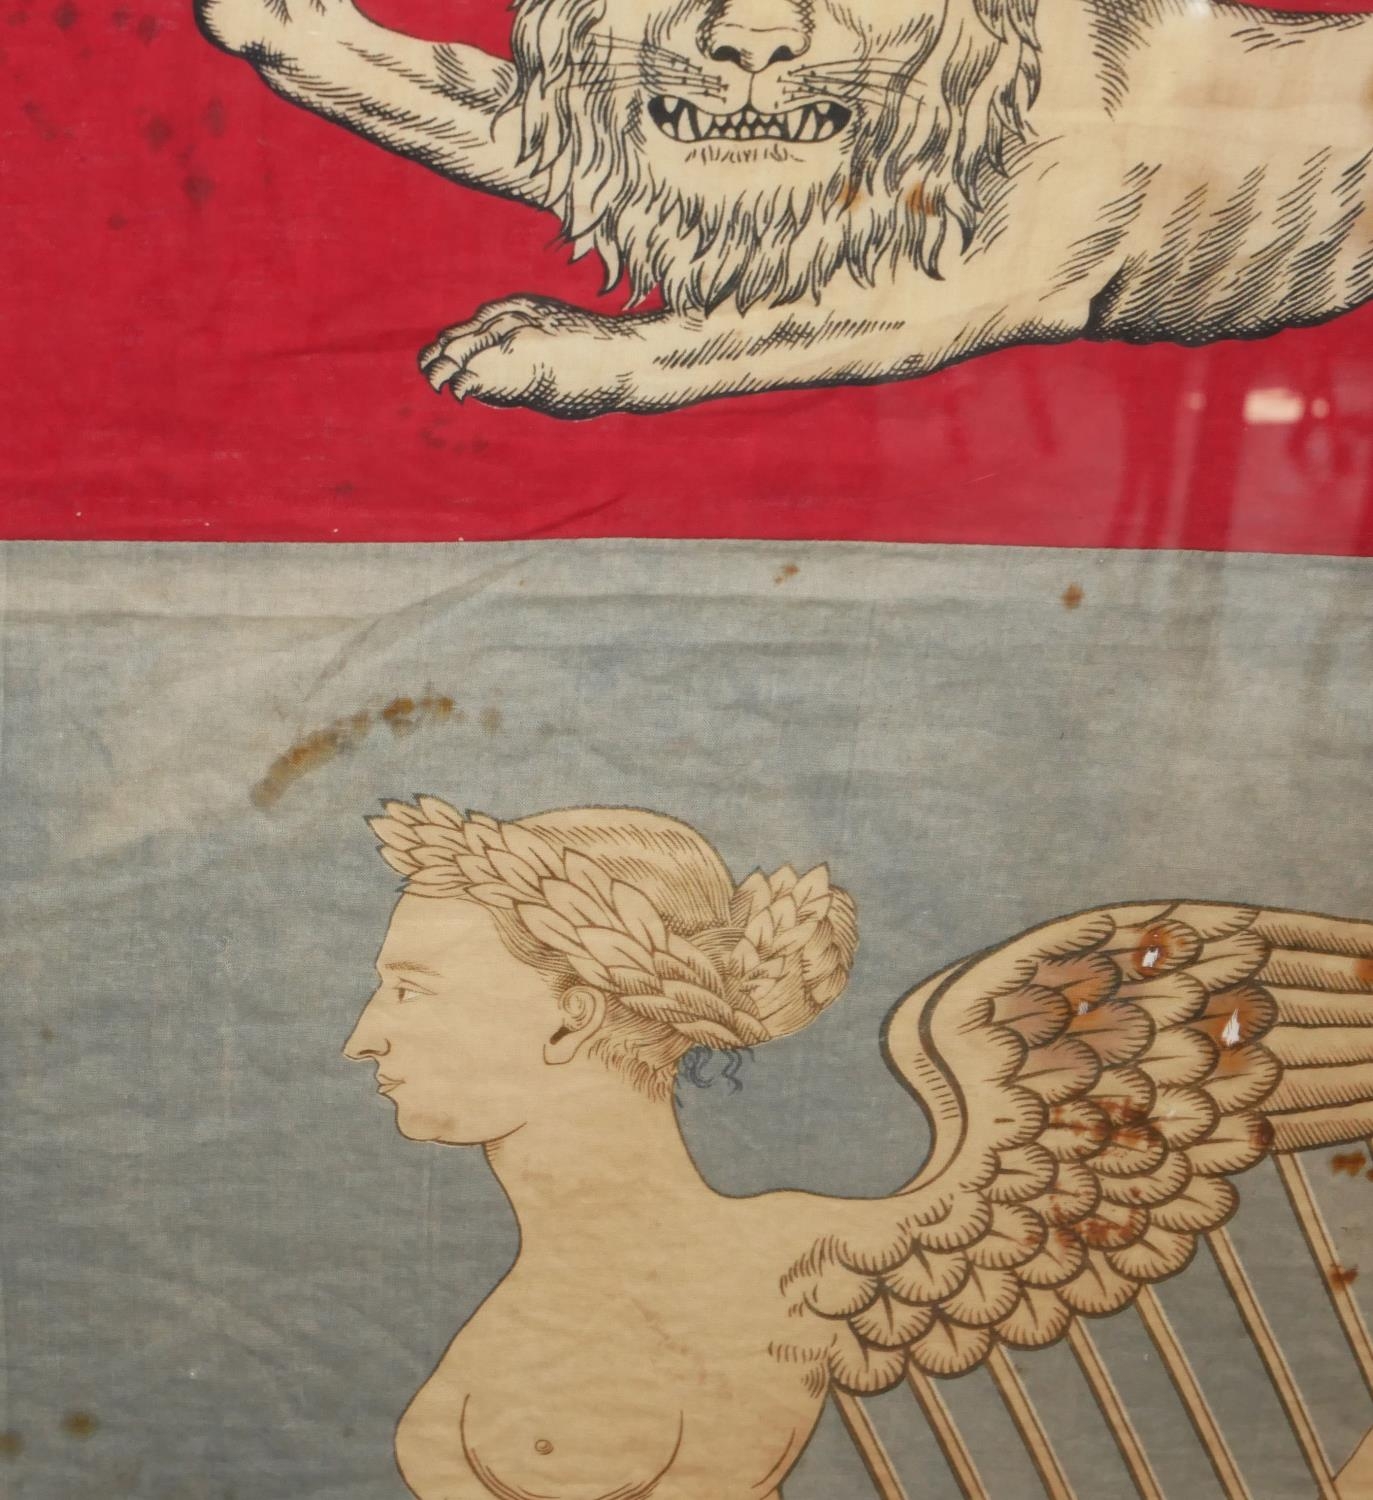 AN 18TH CENTURY ENGLISH IMPERIAL NATIONAL FLAG PAINTED ON COTTON With symbolic three English lions - Image 5 of 16